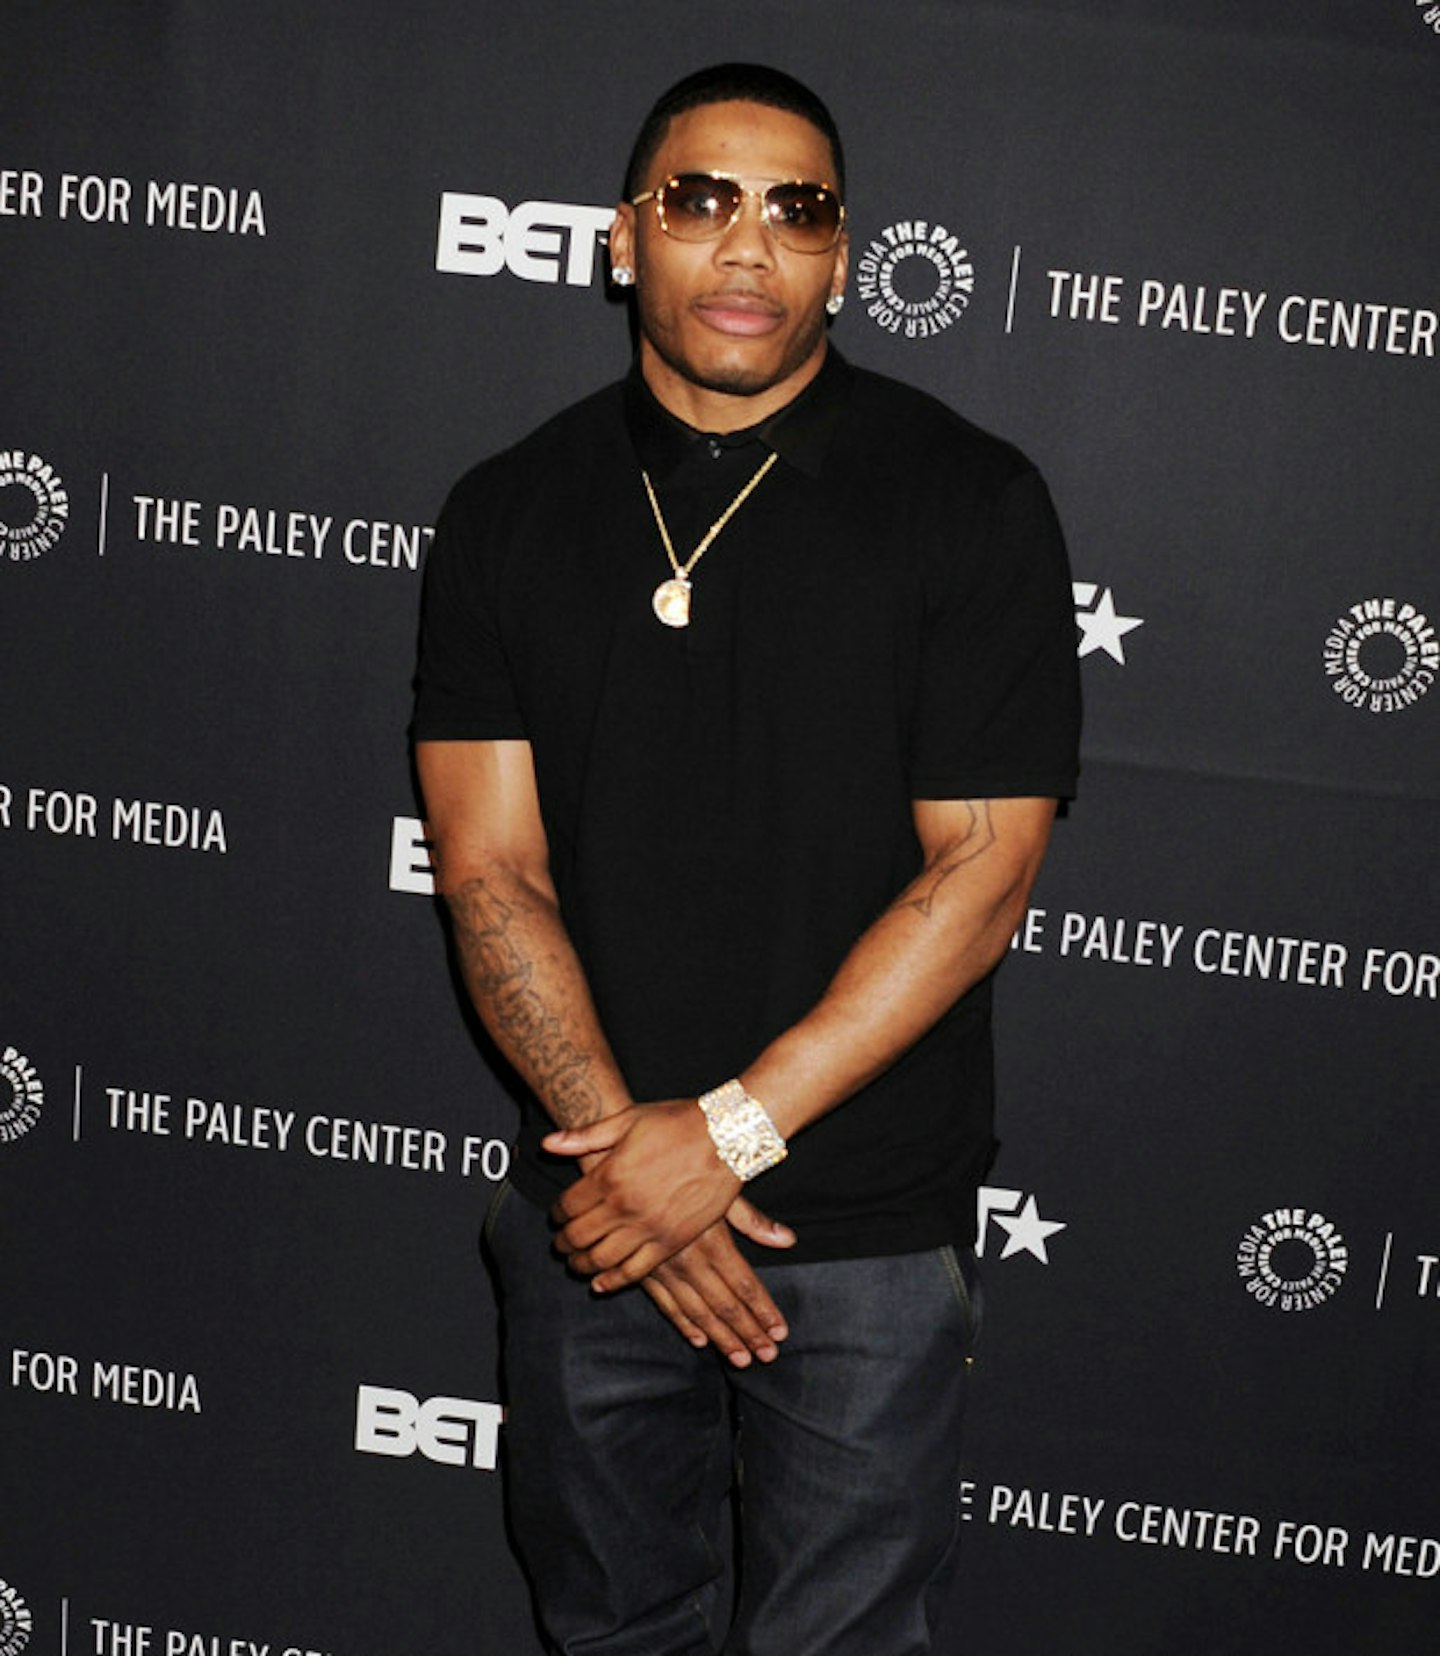 Nelly - now